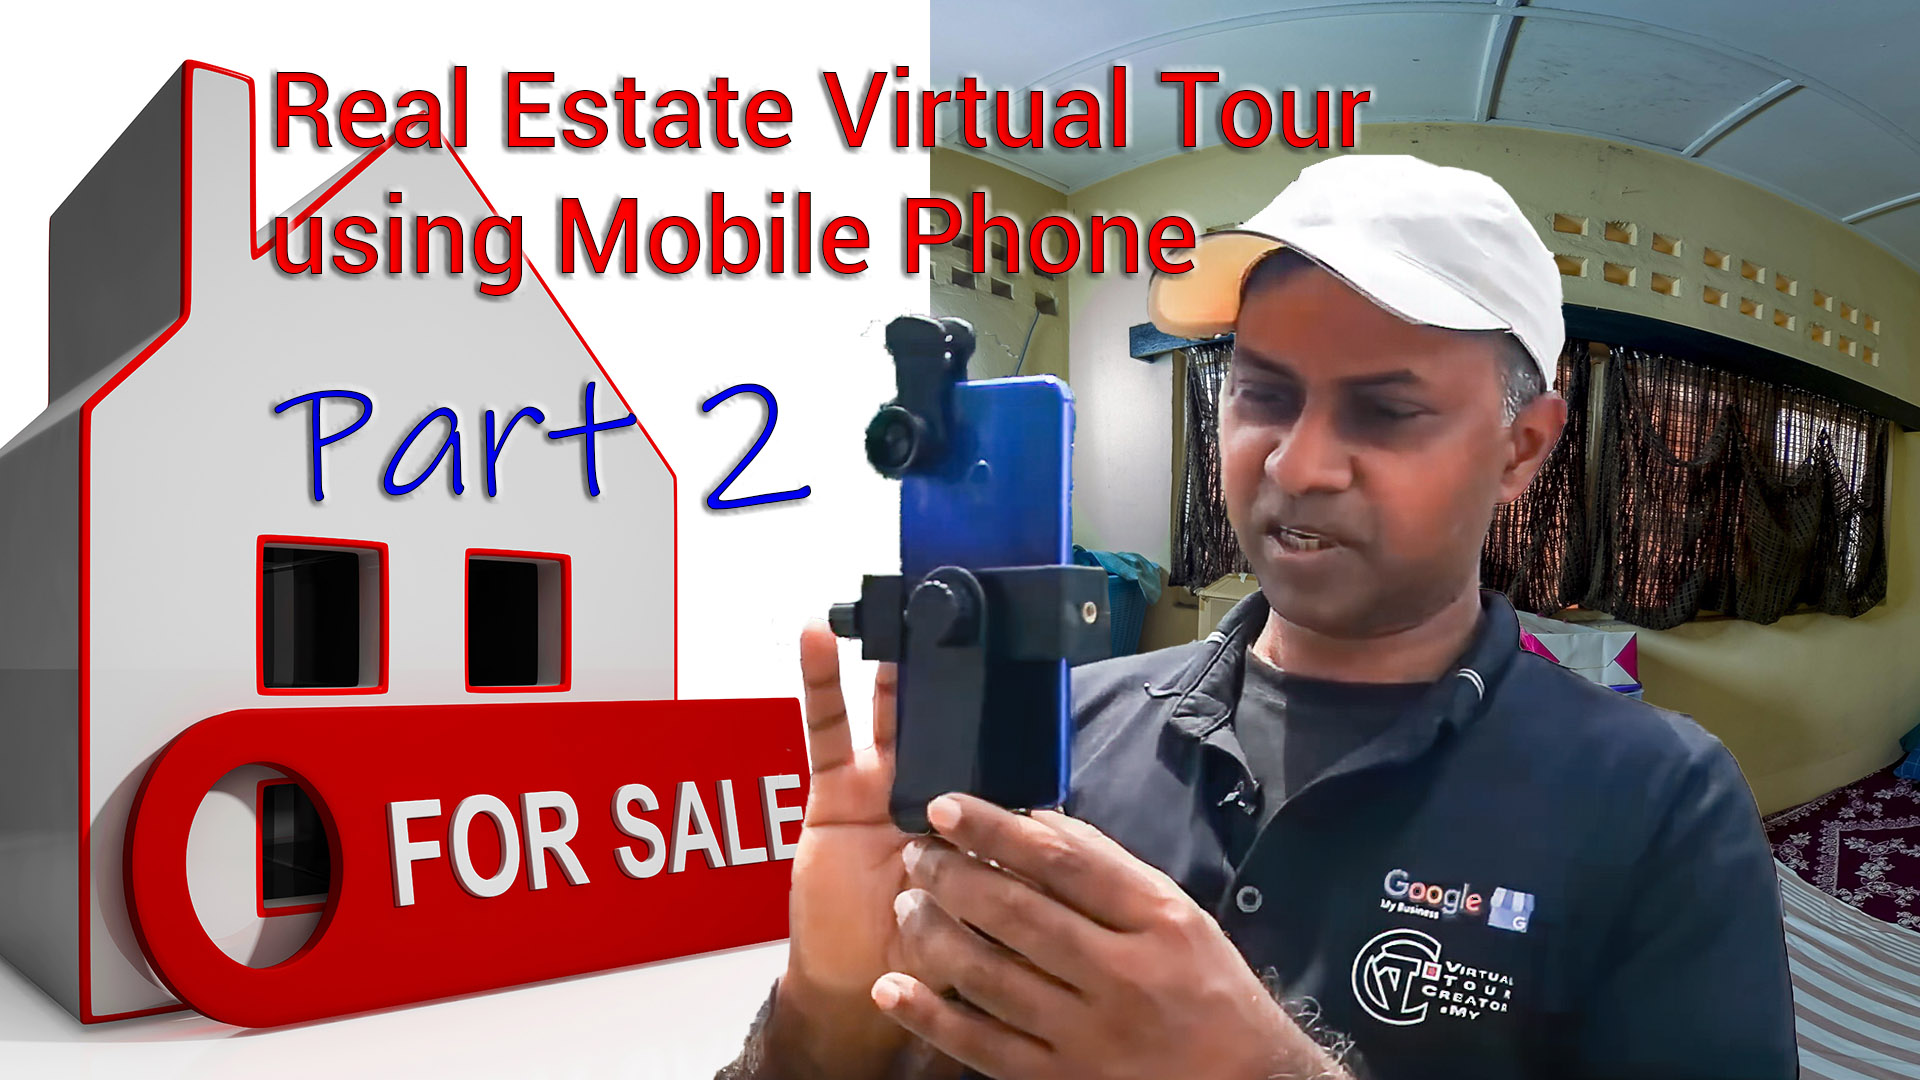 Real Estate agents can save money and time by using mobile Virtual Tour. We will guide to capture property using a mobile phone camera next the tour creation done by Virtualtourcreator.my and hosted. This is part 2